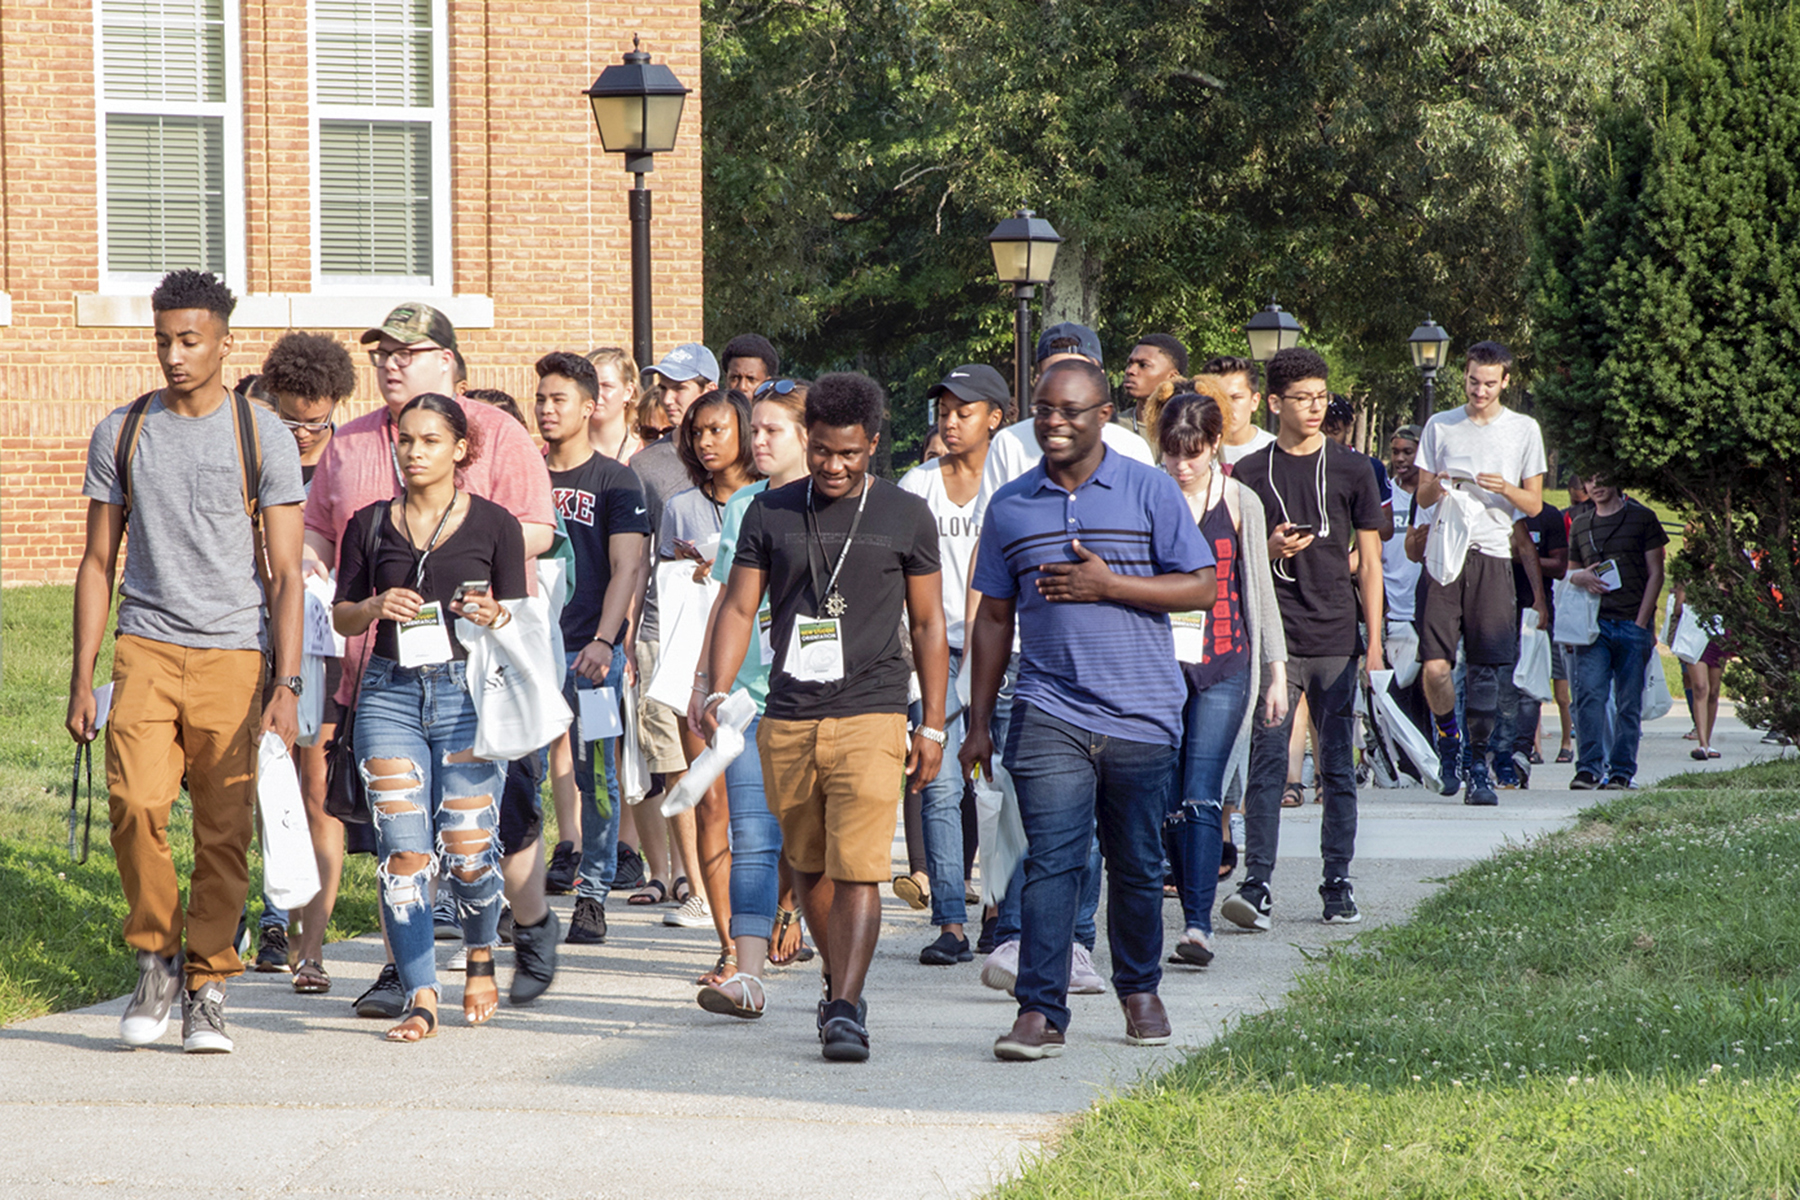 CSM Welcomes Students for the 2019 Fall Semester with a Busy September